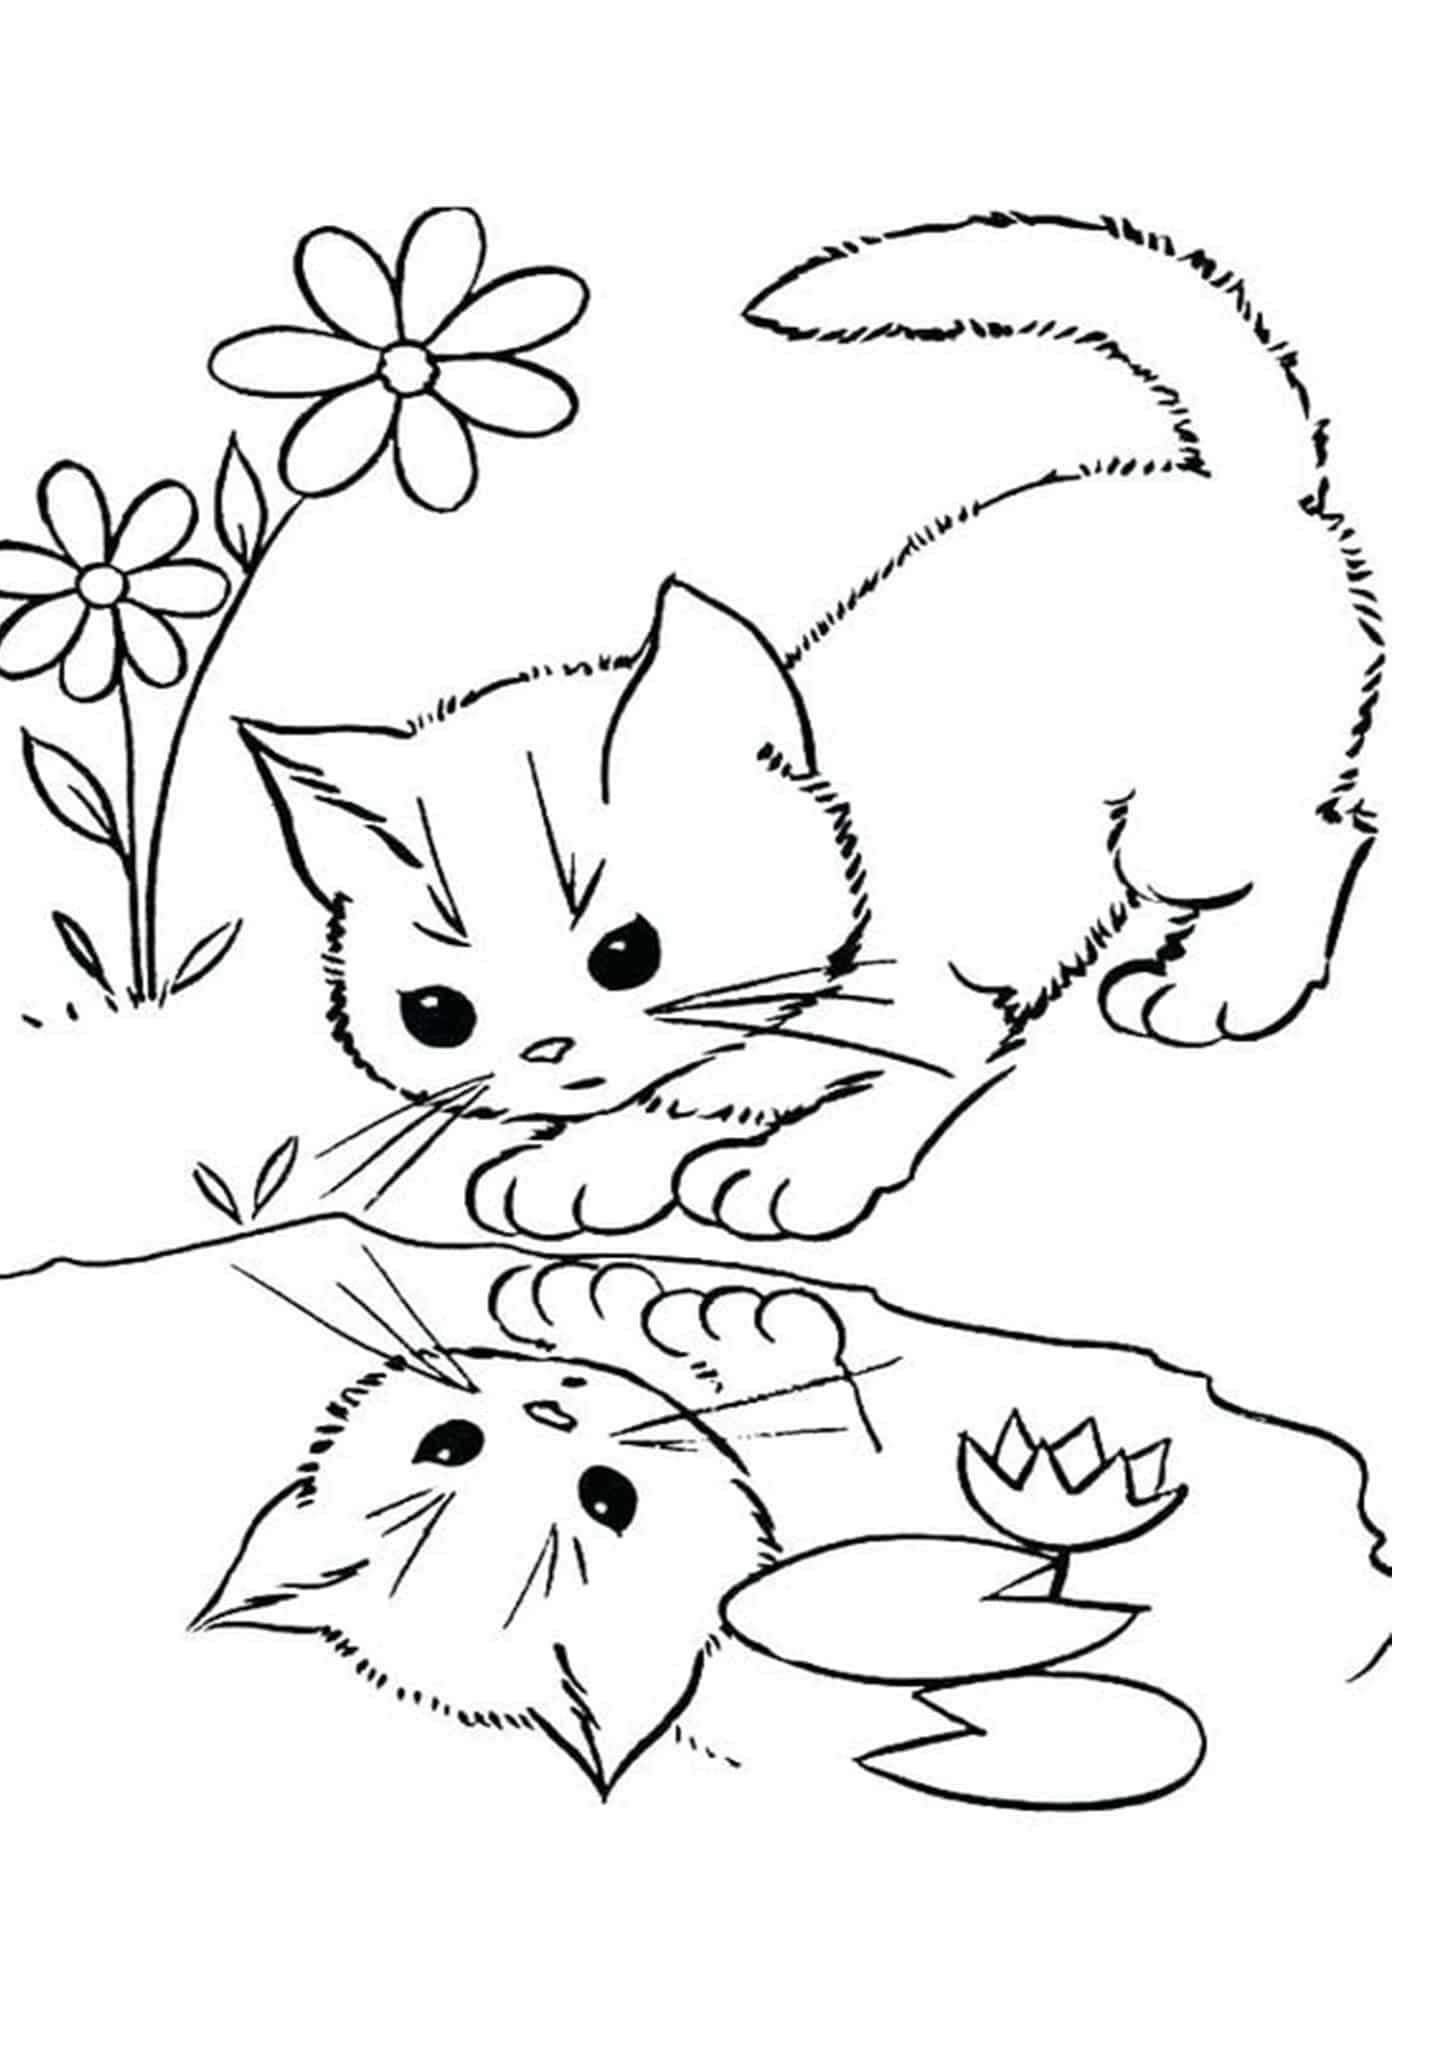 Free easy to print kitten coloring pages cat coloring page kittens coloring cute coloring pages